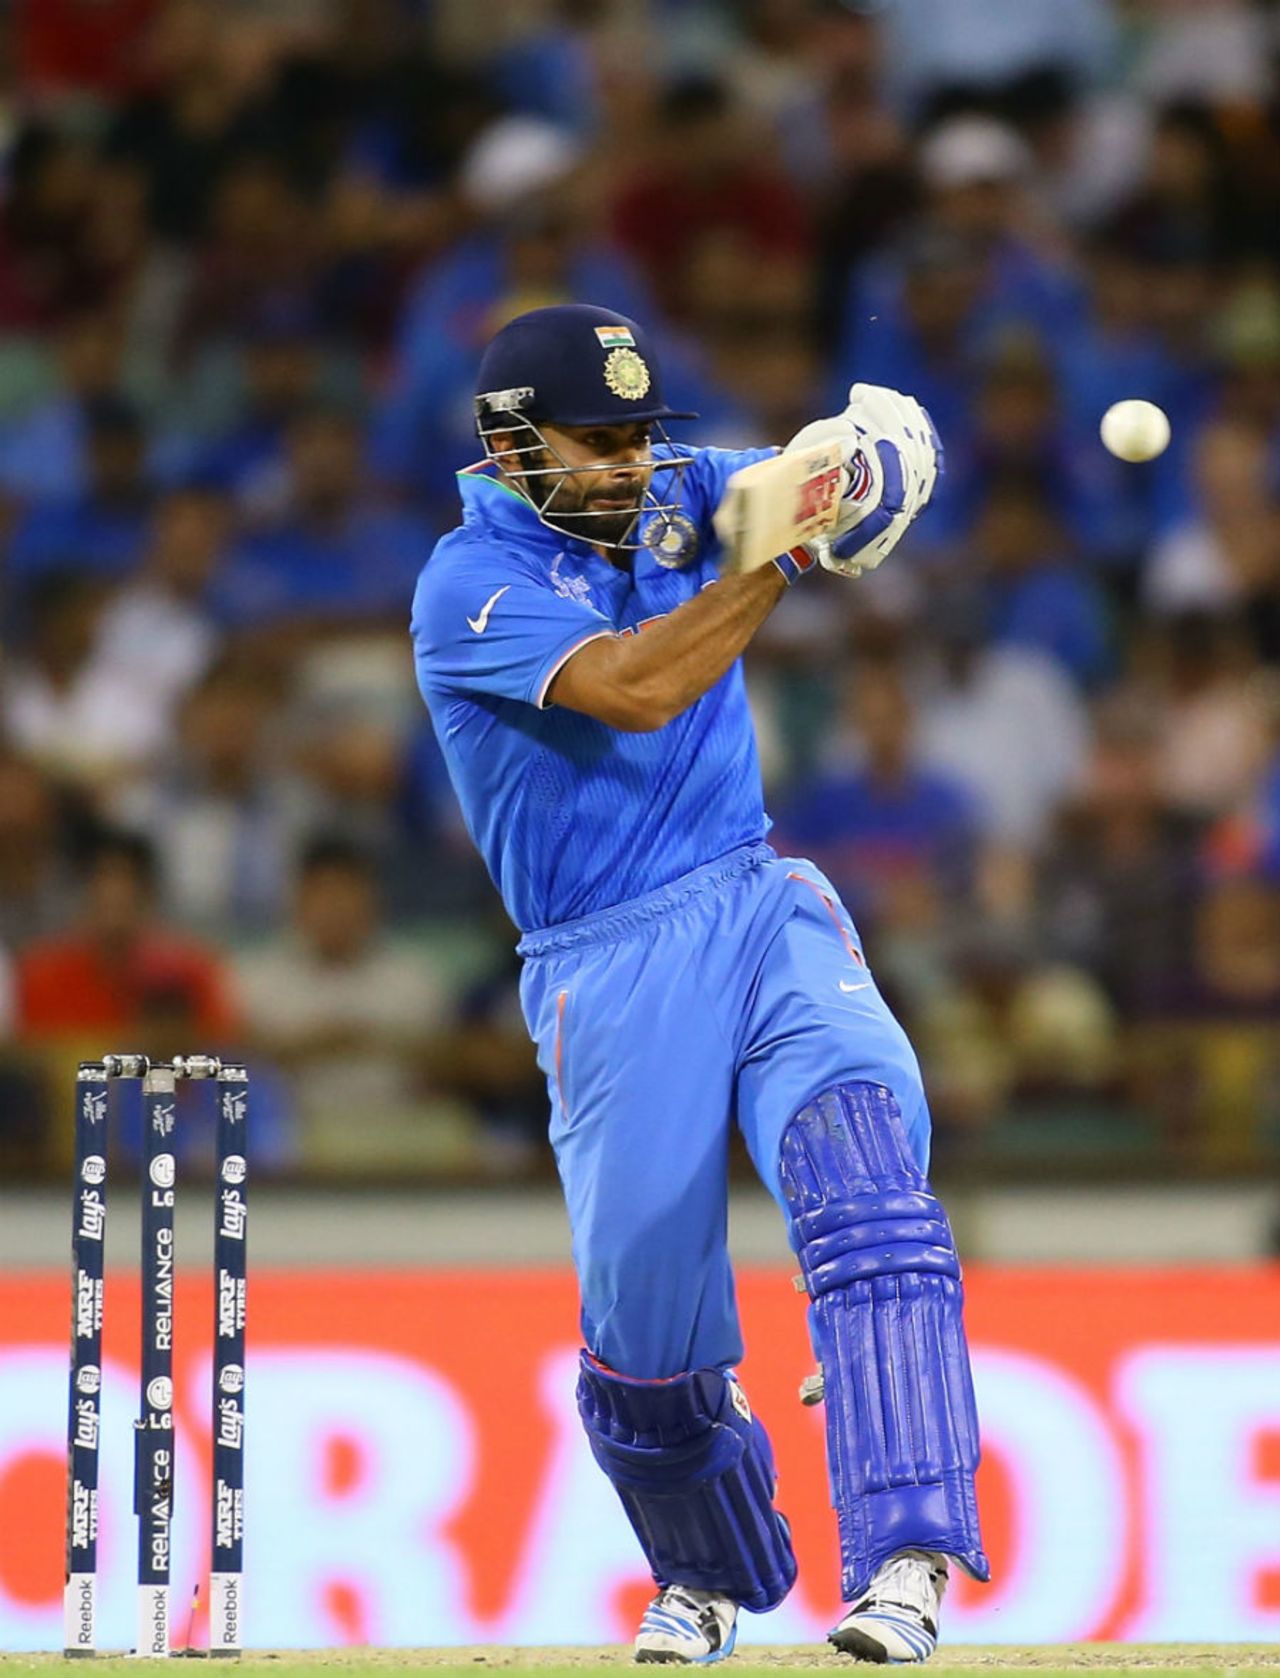 Virat Kohli holed out to square leg for 33 off 36 deliveries, India v West Indies, World Cup 2015, Group B, Perth, March 6